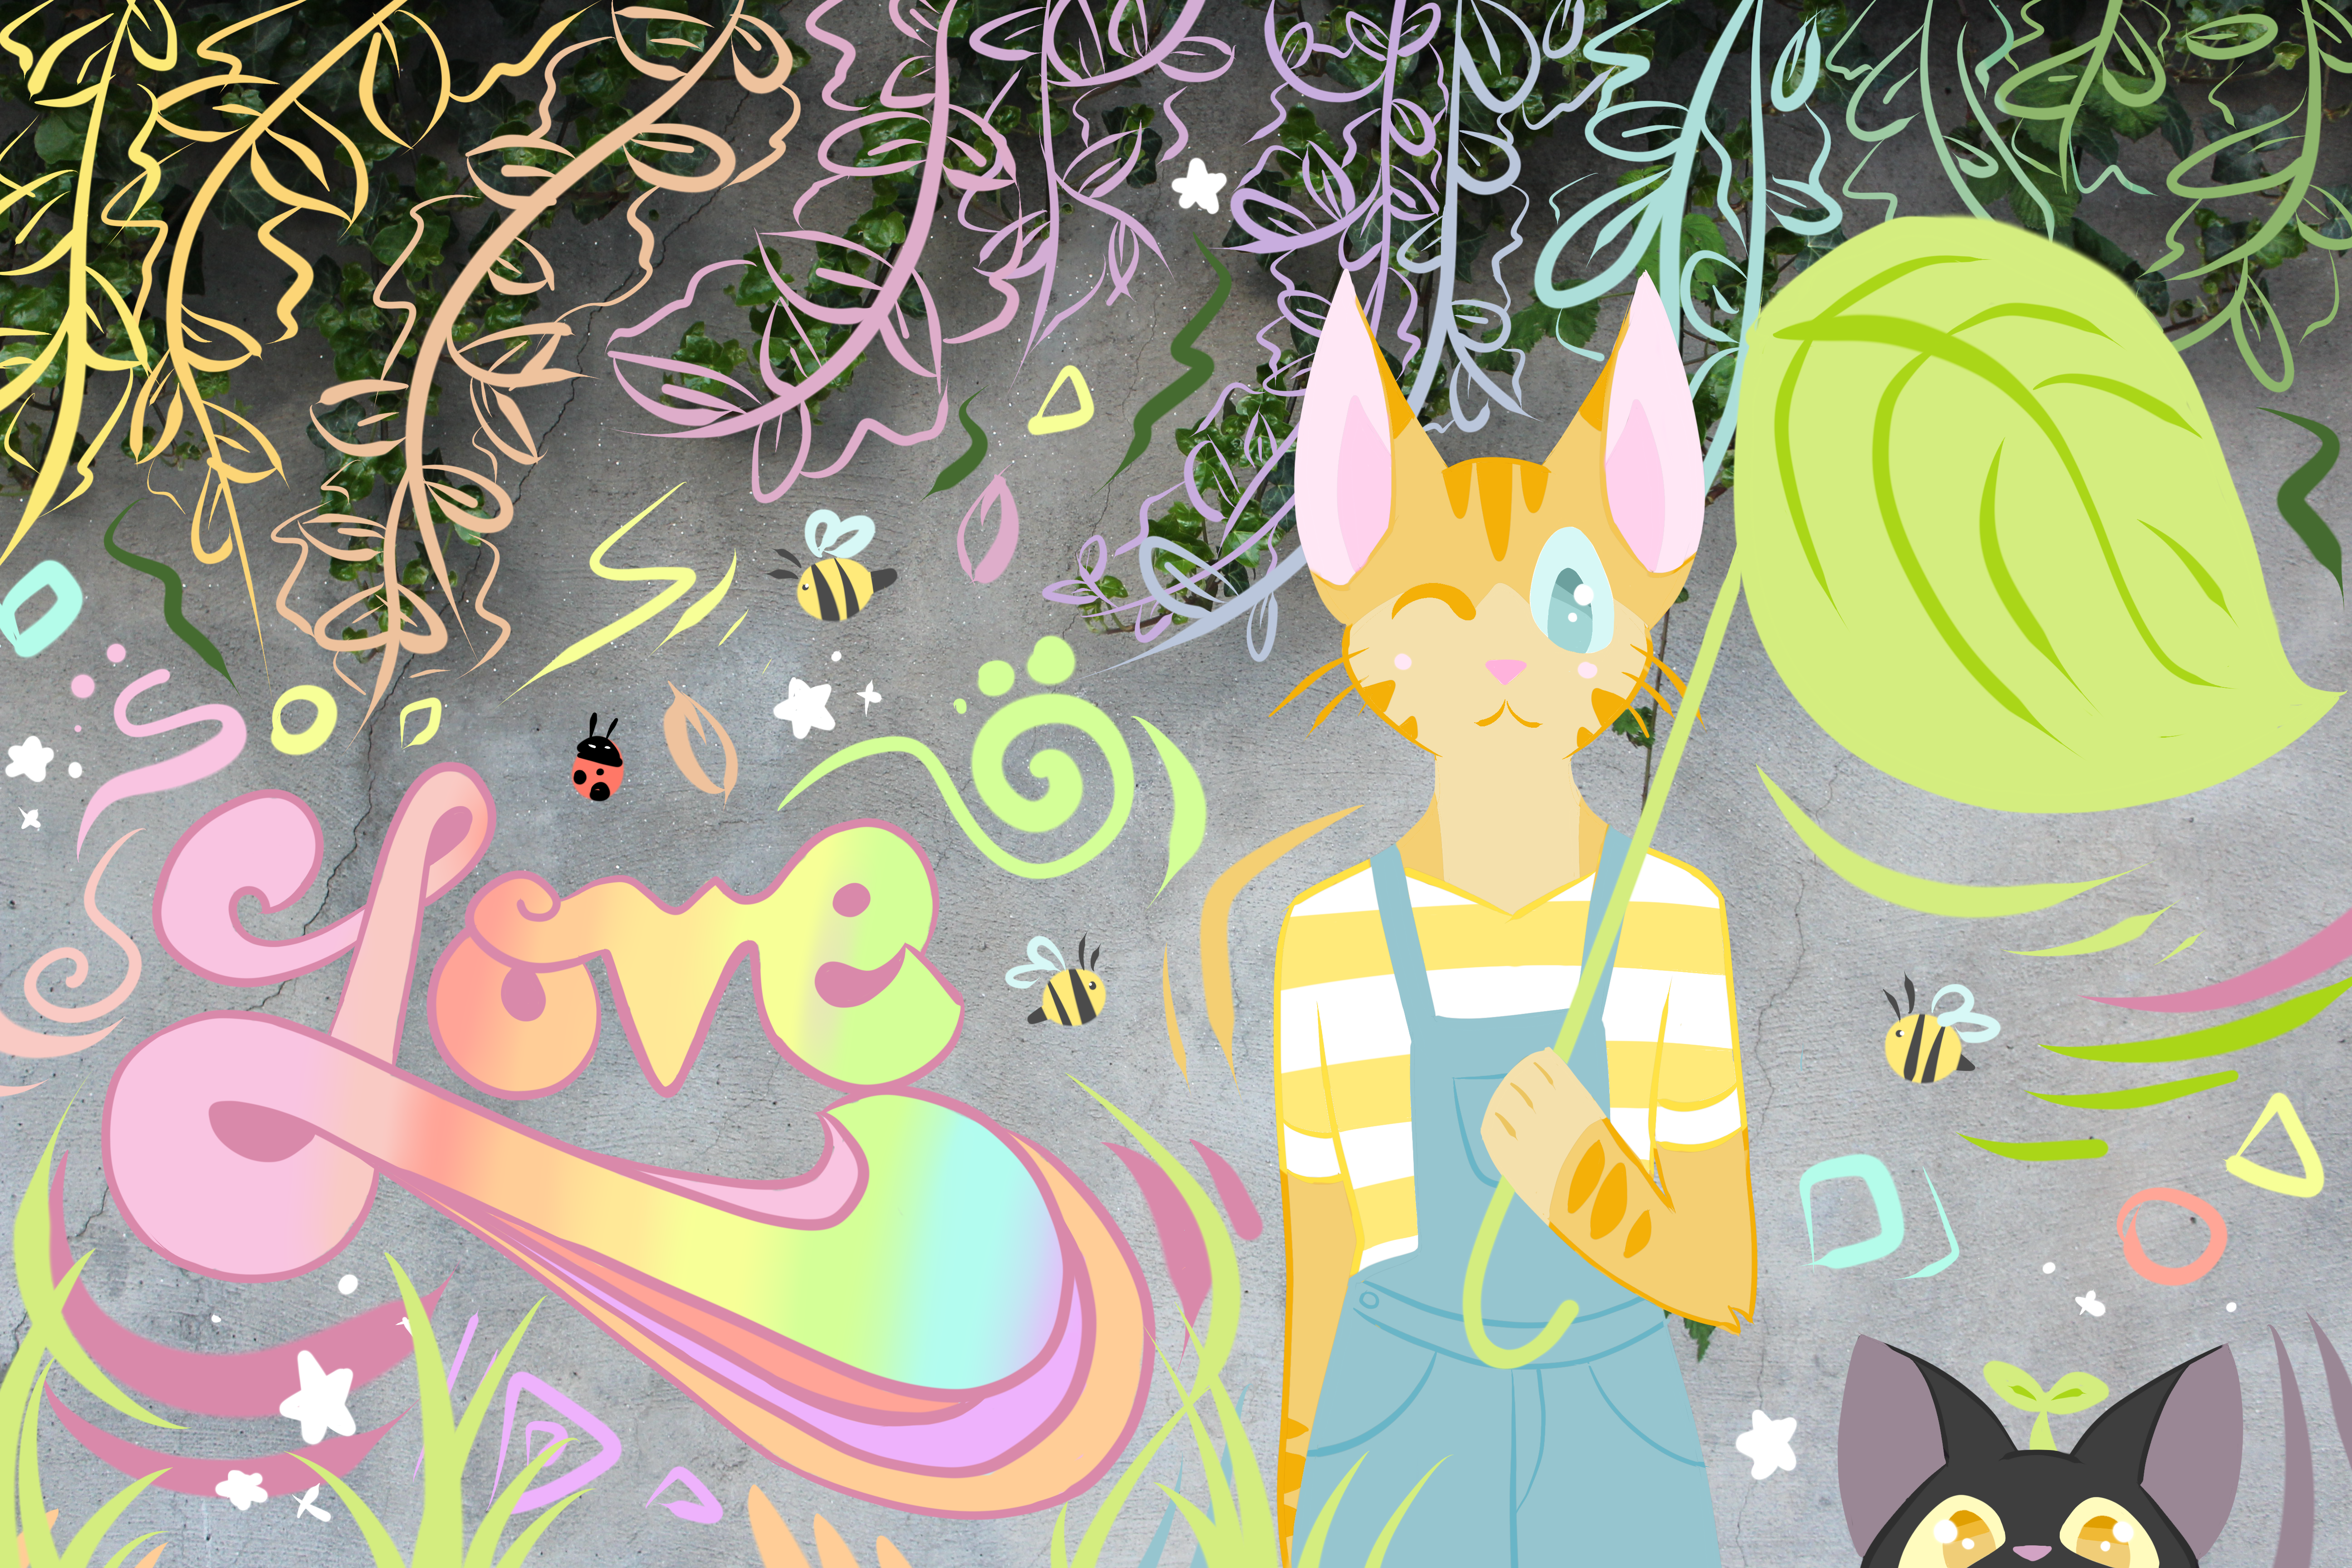 A photograph of a cement wall with colorful illustrations drawn on it, two cartoon cats are in the foreground, twisting vines and plant life alongside graffiti are in the background.